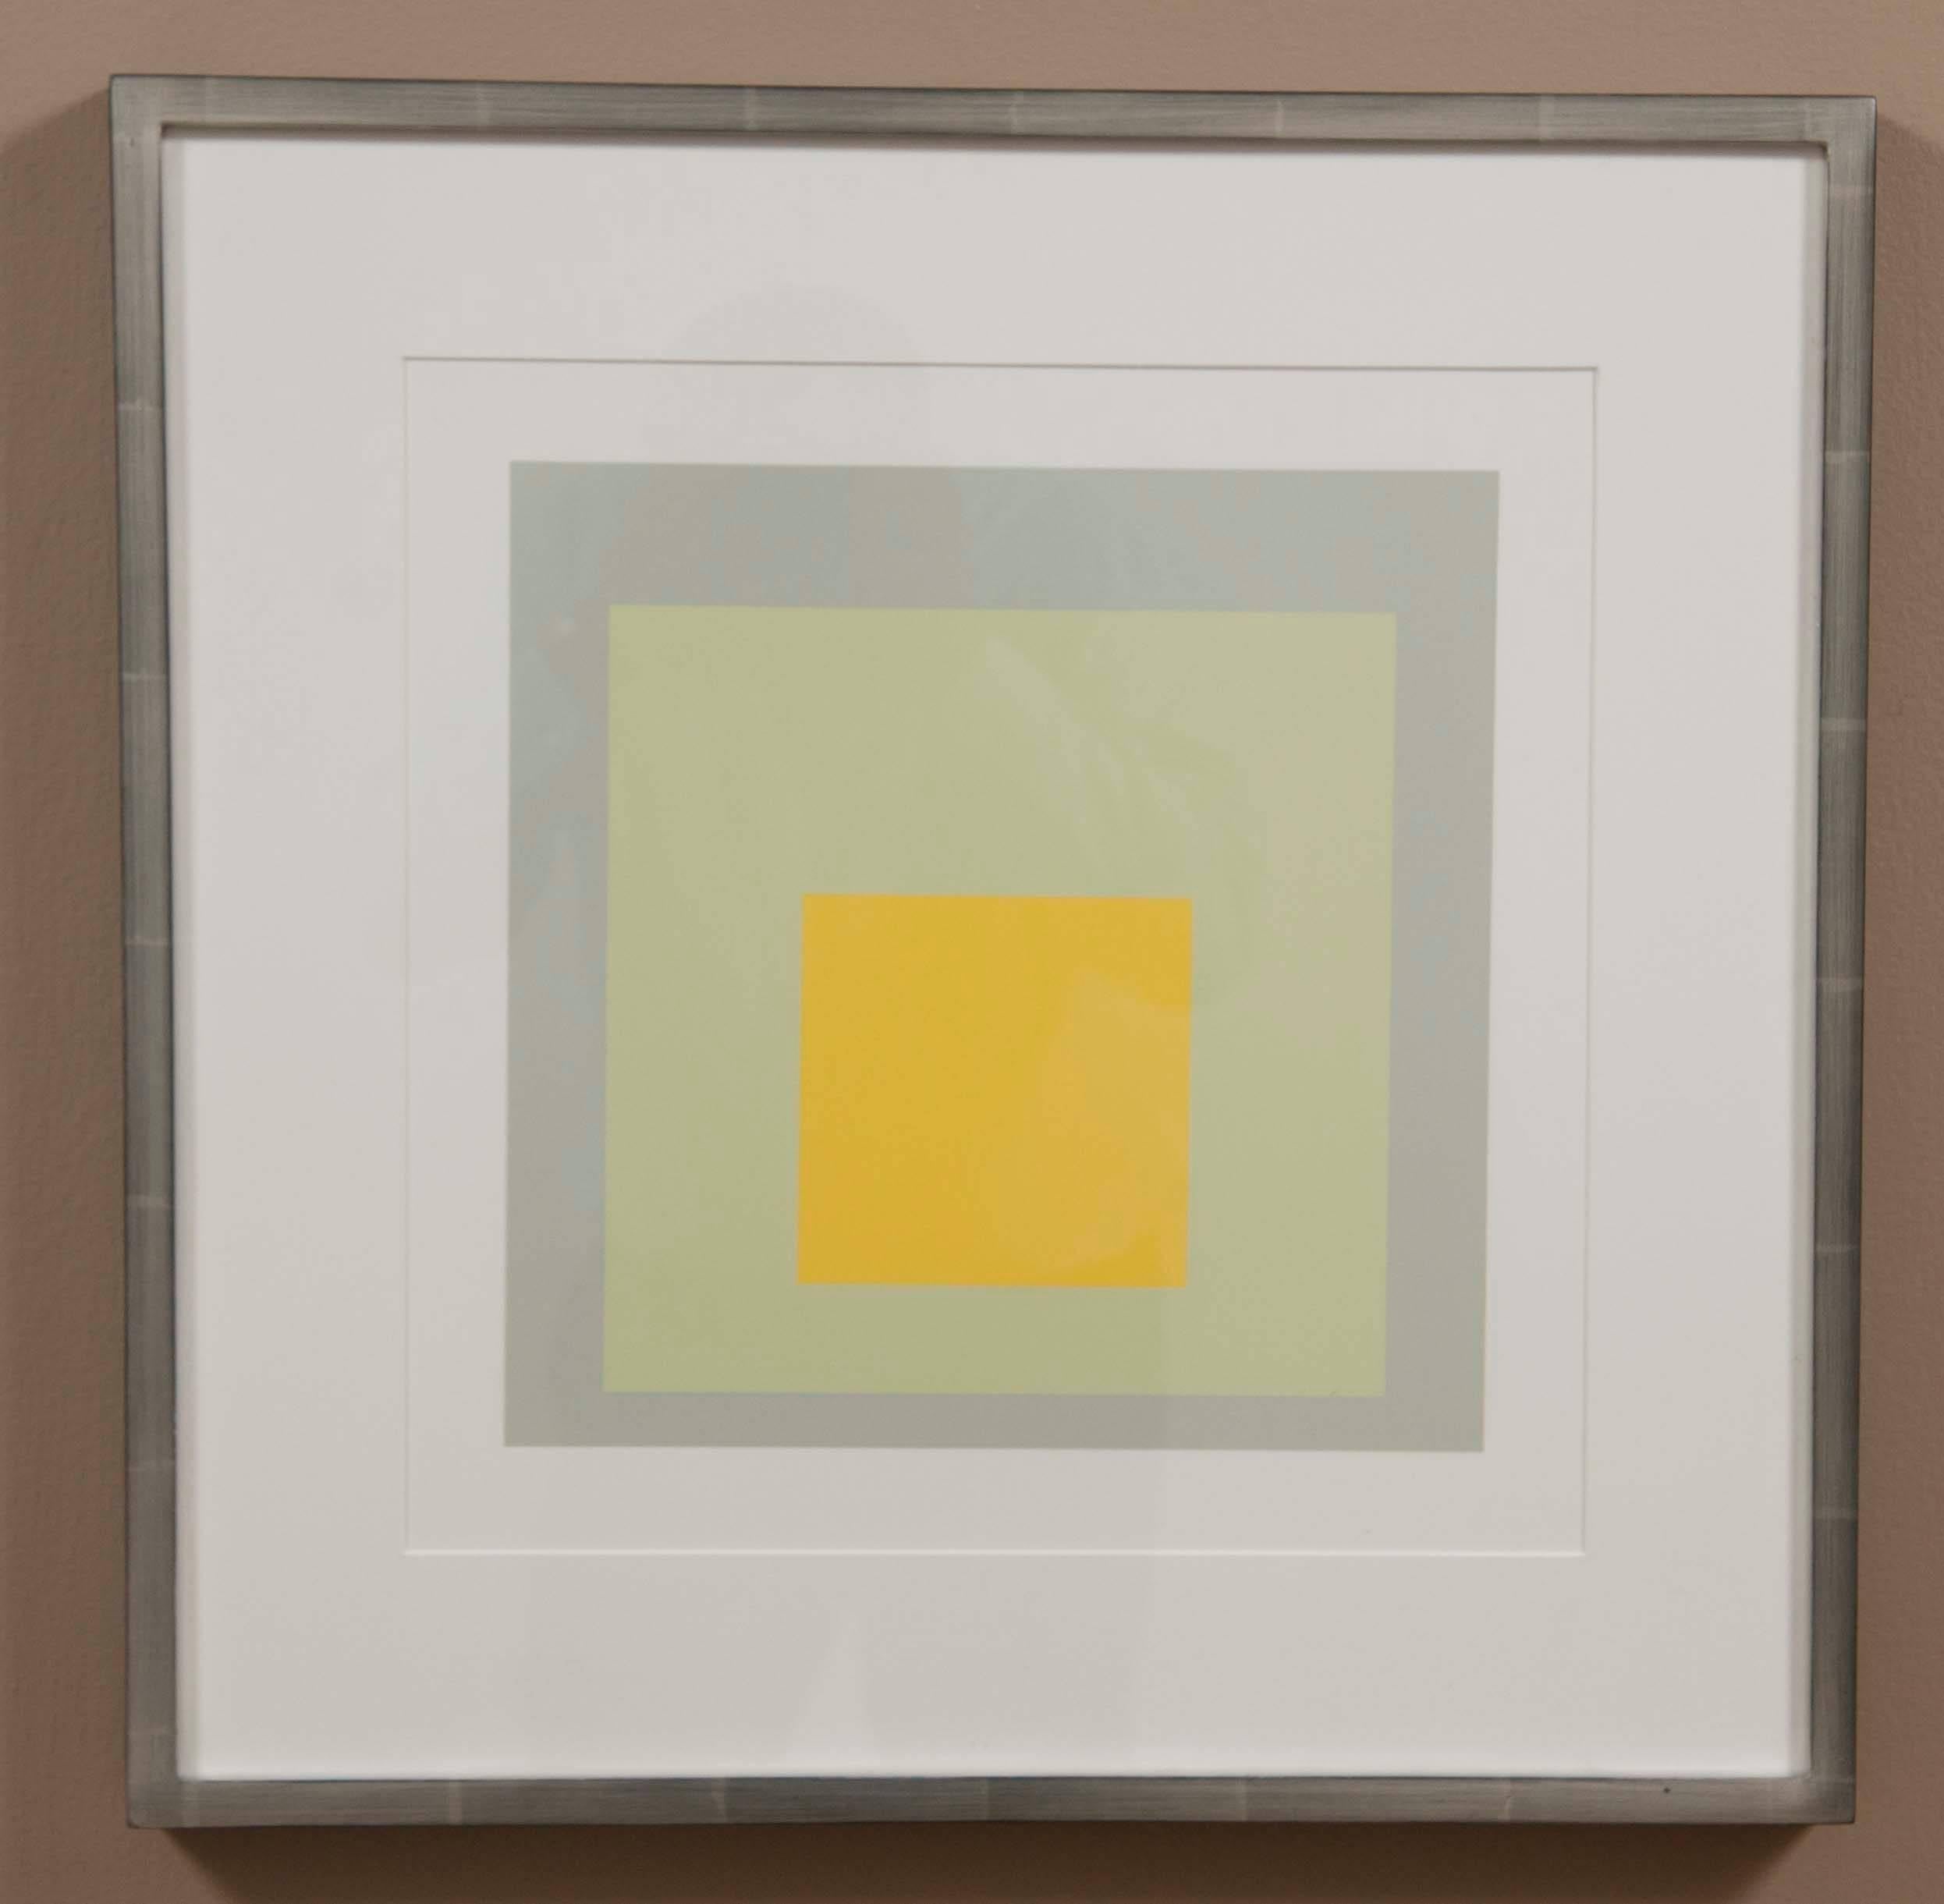 Josef Albers Homage to the square from Formations: Articulation 1972. Silkscreen prints, Folio 2. Floated in silver gilt frame using all acid free archival materials. #176 of 1000 printed.

Printed by Sirocco Screen printing, New Haven.